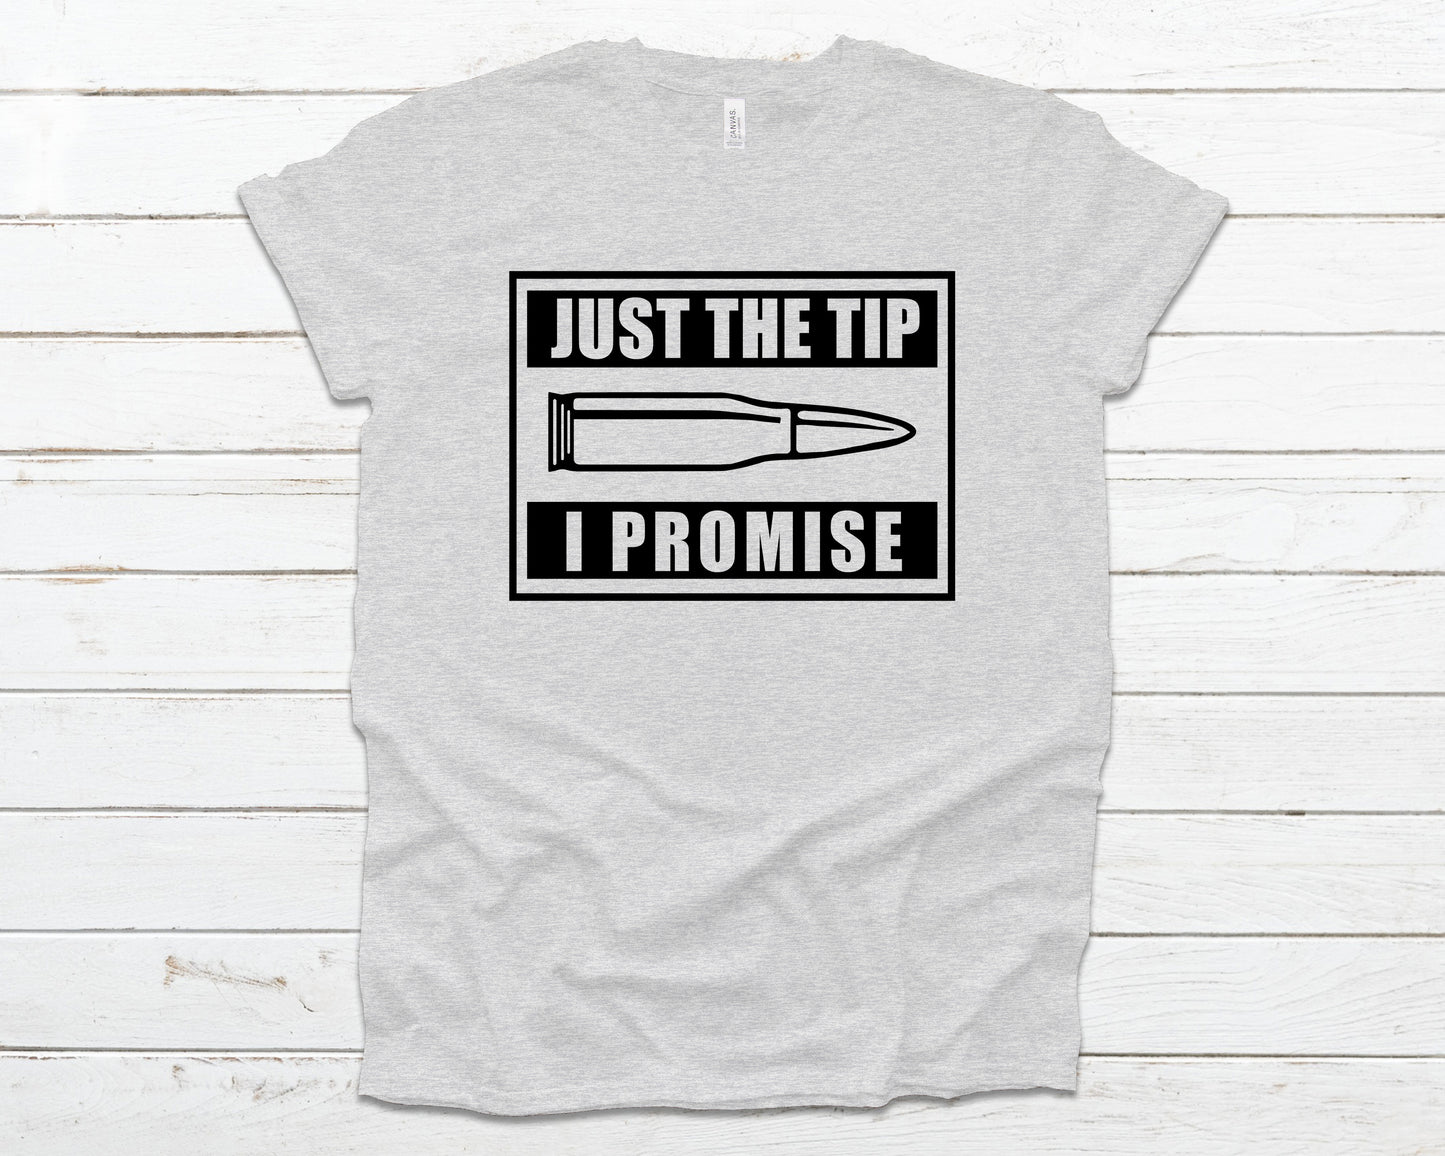 Just the tip I promise